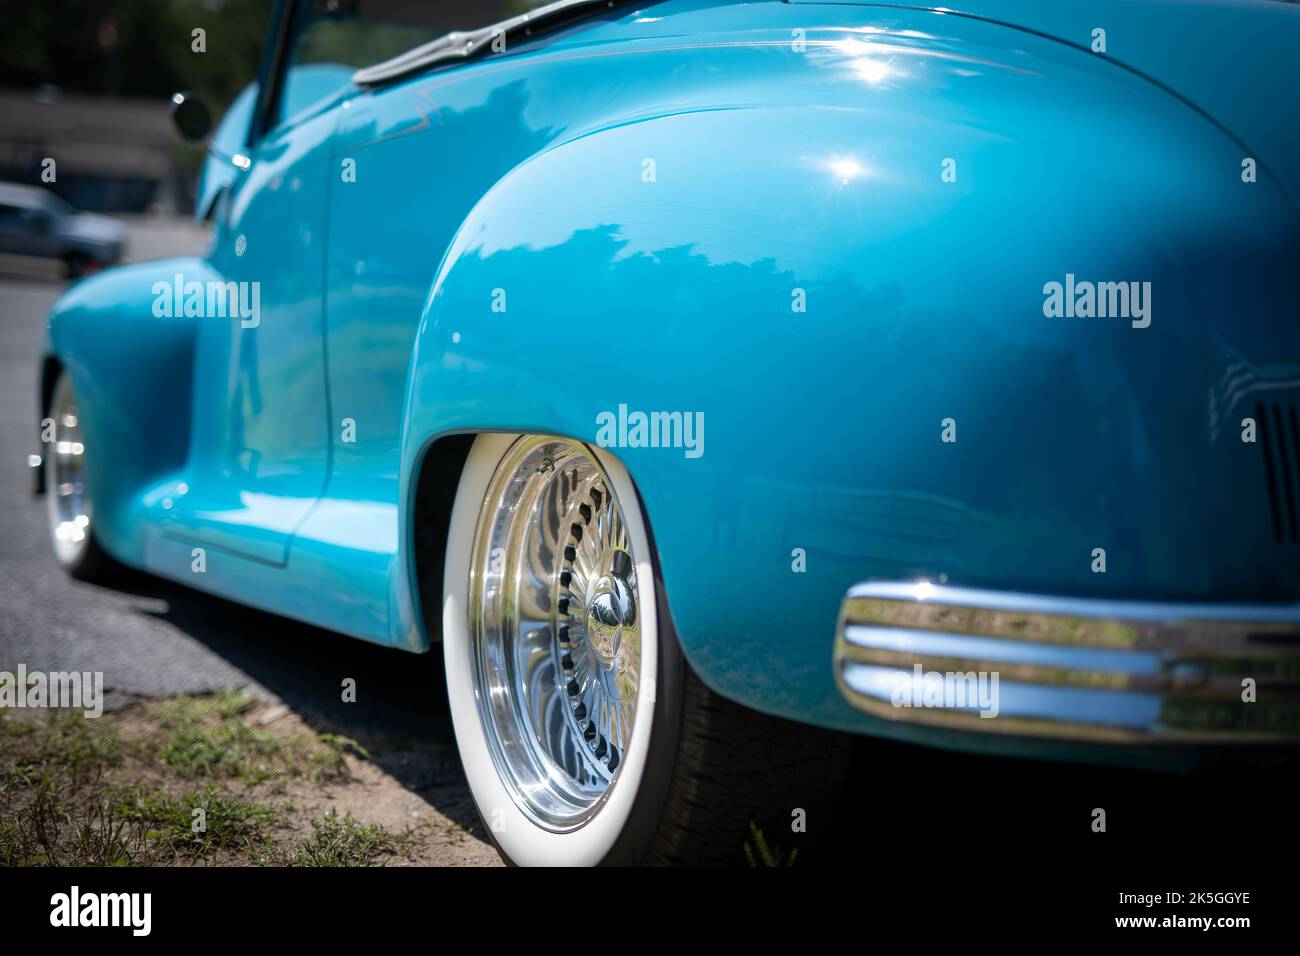 NISSWA, MN  30 JUL 2022: Close view of back left vivid sky blue antique vintage convertible automobile with the top down at a car show in Minnesota in bright sunlight. Shallow depth of field focus. Stock Photo